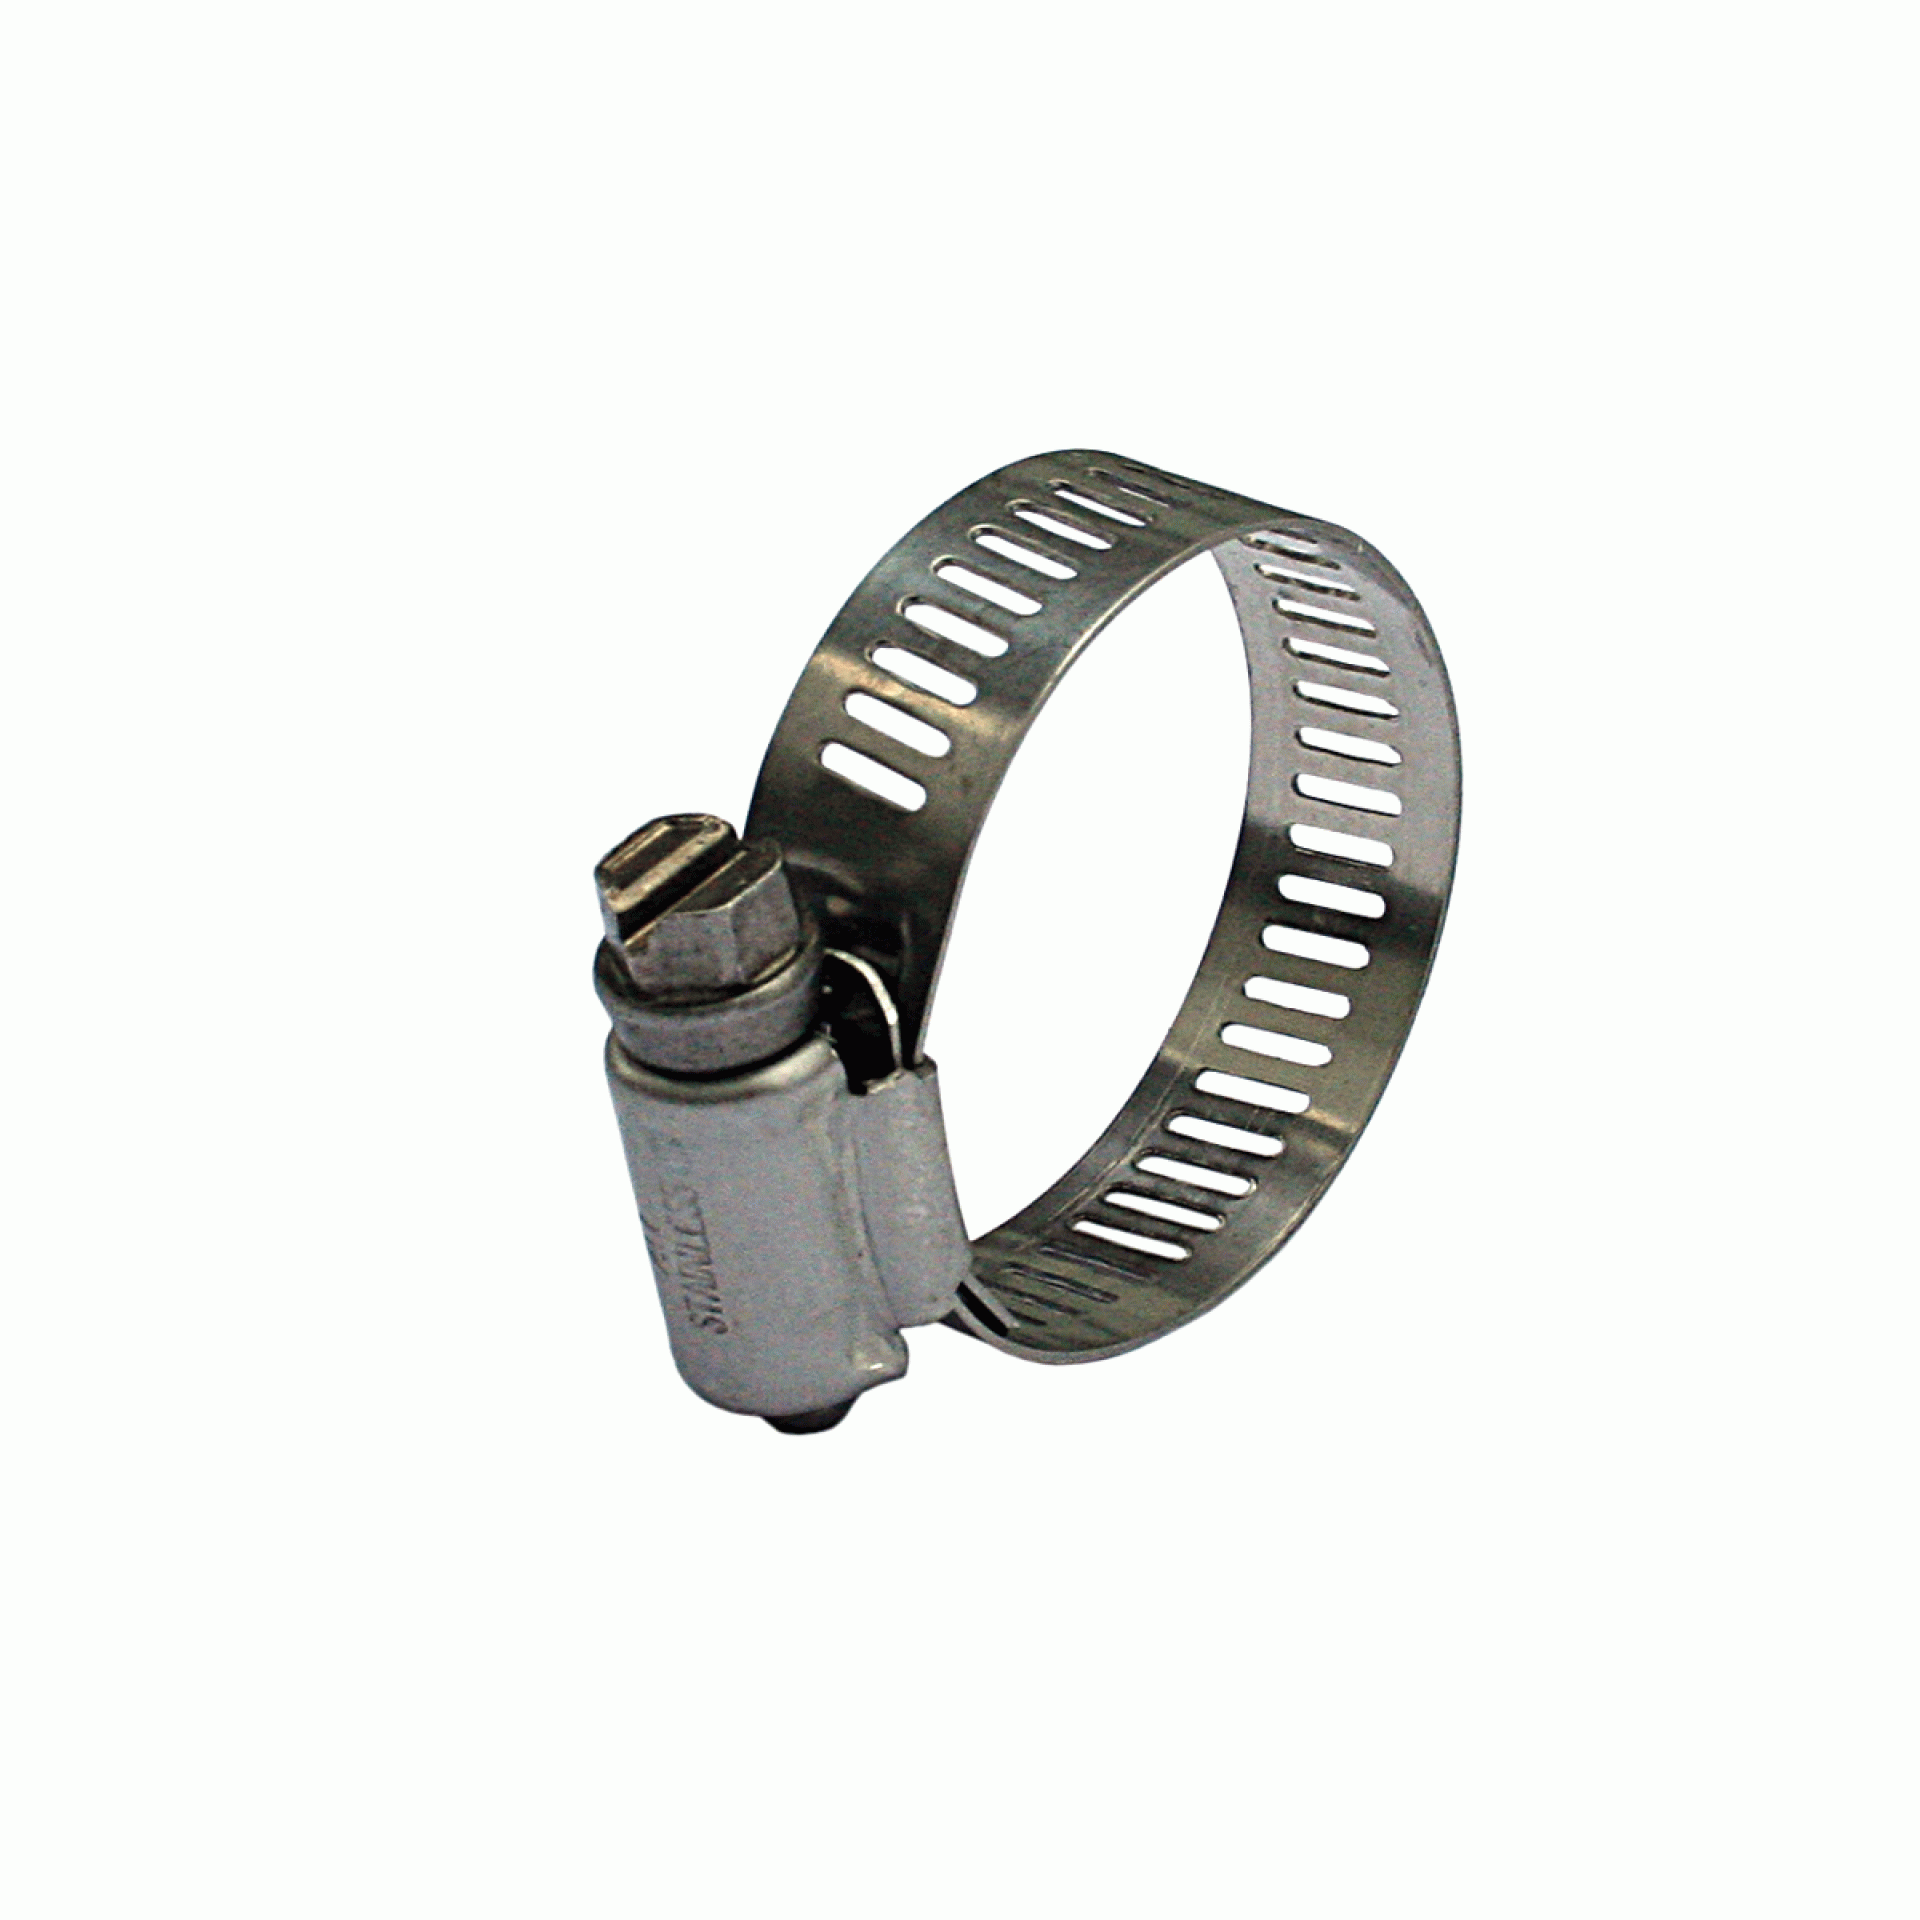 DUPAGE PRODUCTS GROUP | B10HS | DIA. MIN. 9/16" MAX. 1-1/16" FITS HOSE:3/8" TO 5/8"